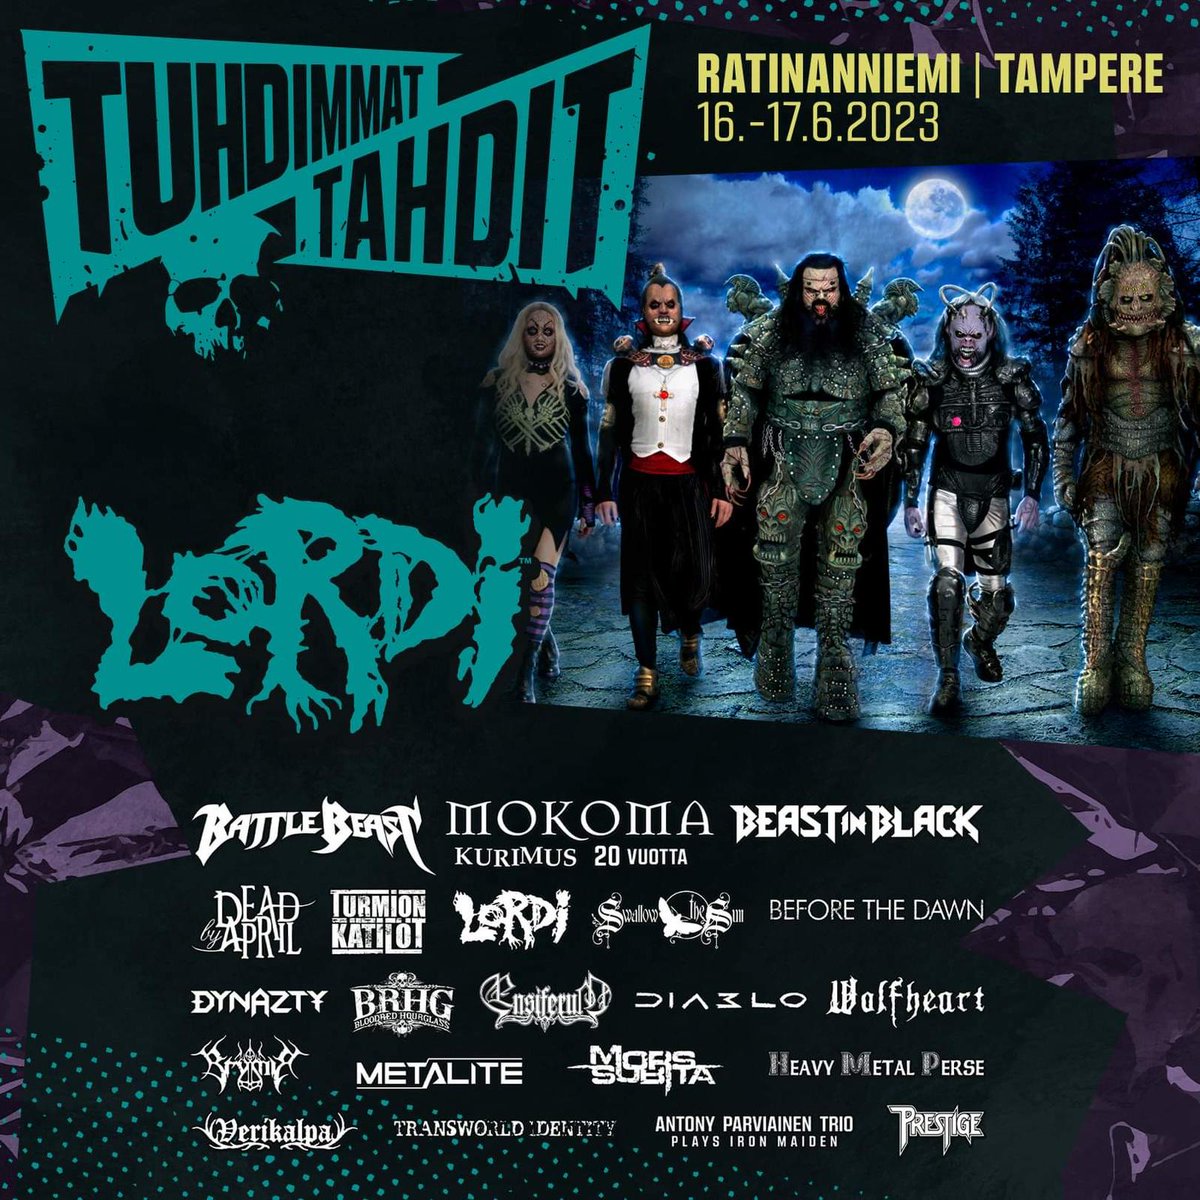 Tampere, Finland 🇫🇮! We joined the line-up of Tuhdimmat Tahdit and will play on June 16th 🔥! #lordi #screemwritersguild #tuhdimmattahdit #summer2023 #festivalseason #hardrock #heavymetal #monsterband